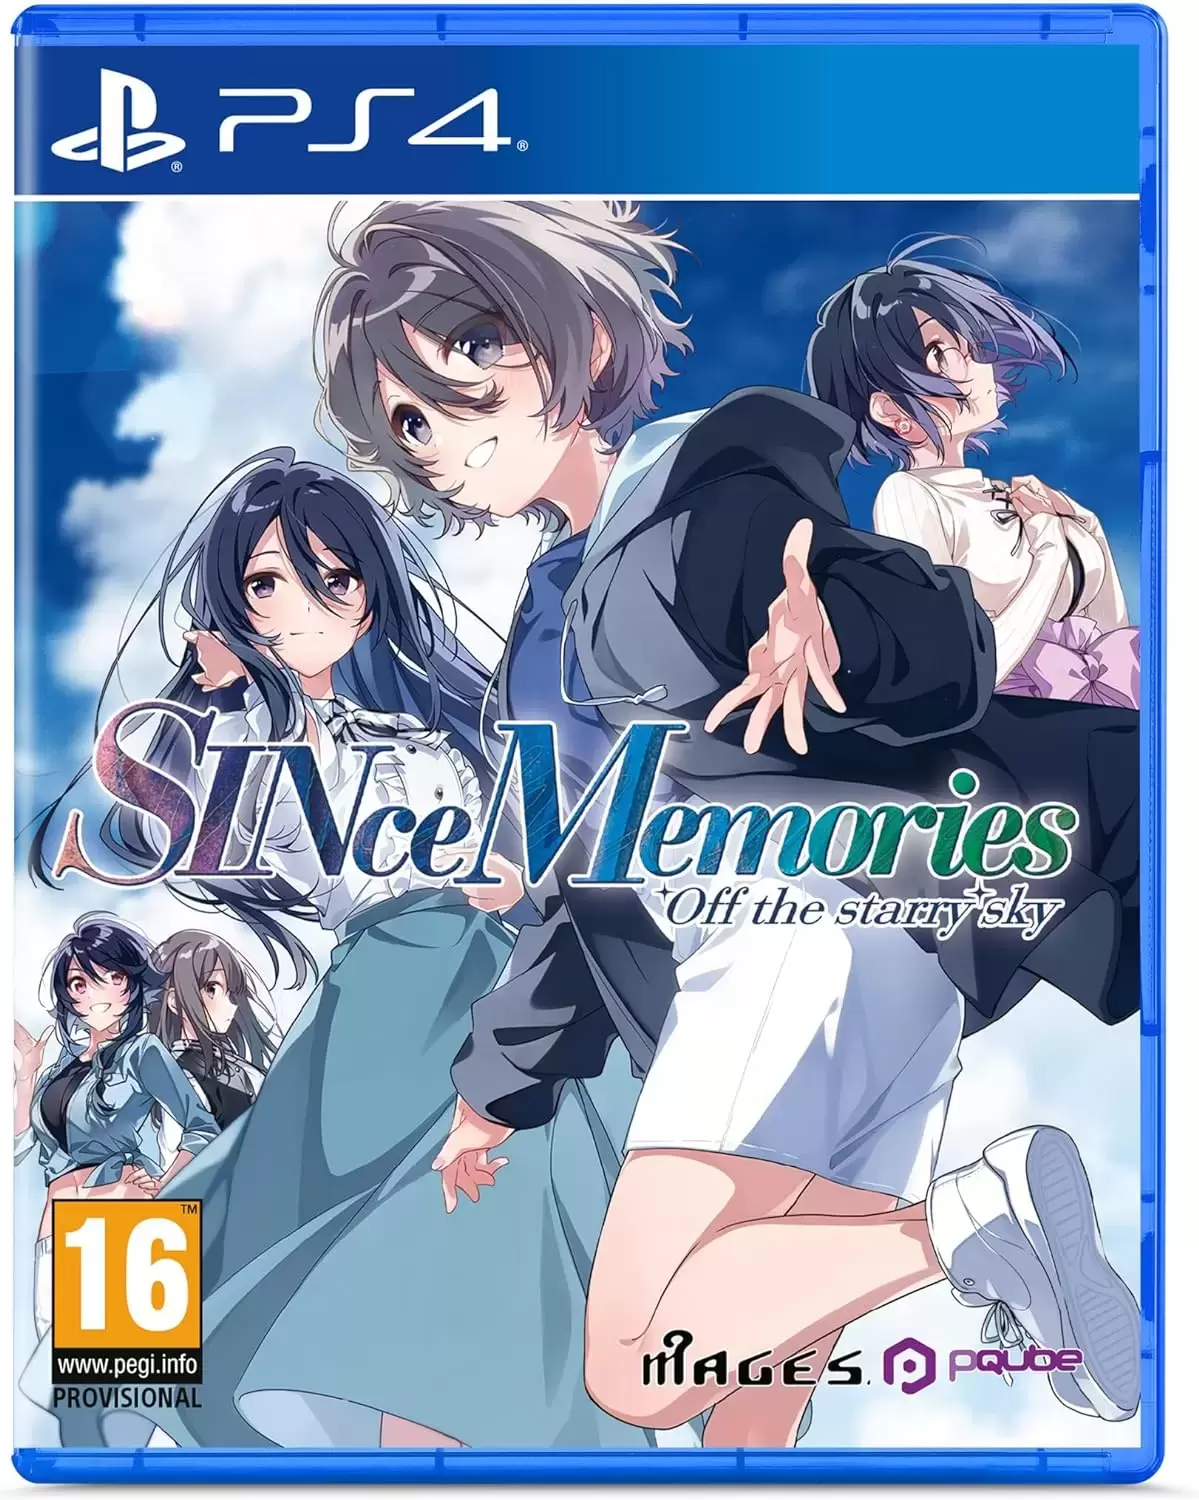 Jeux PS4 - SINce Memories - Off the starry sky